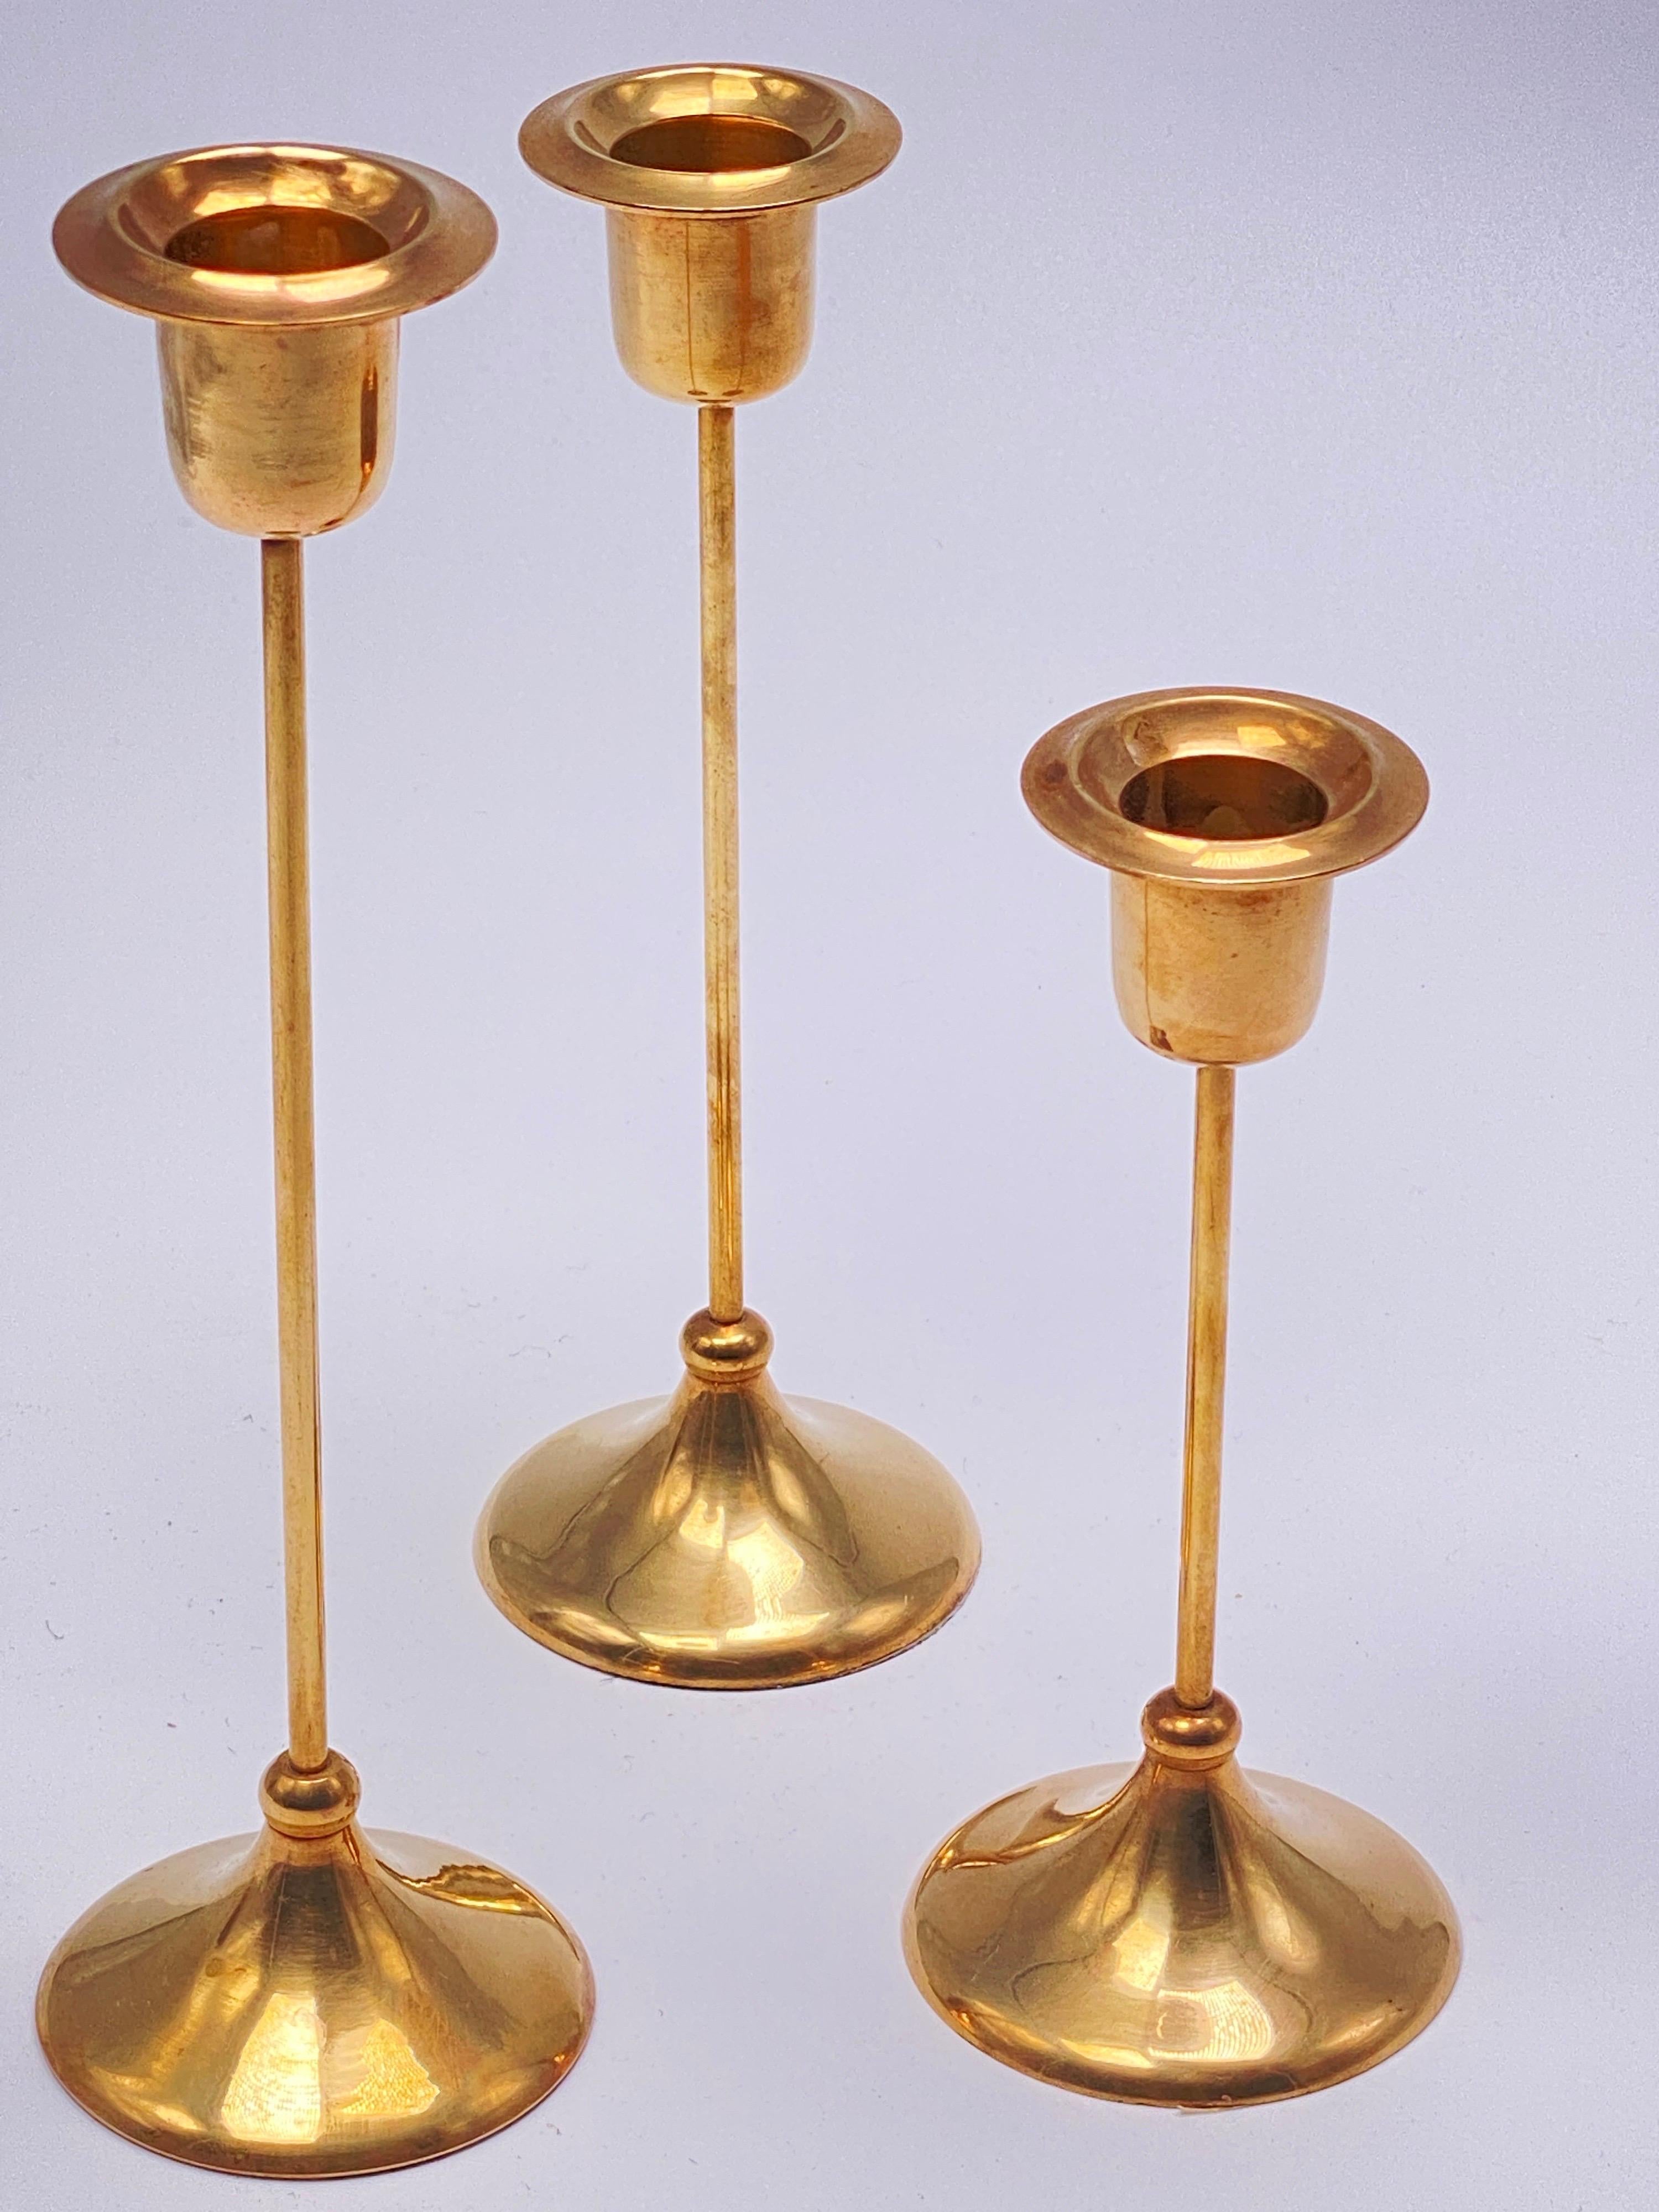 his set is composed of three candlesticks, in brass. it has been made in sweden circa 1960.
The color is gold.